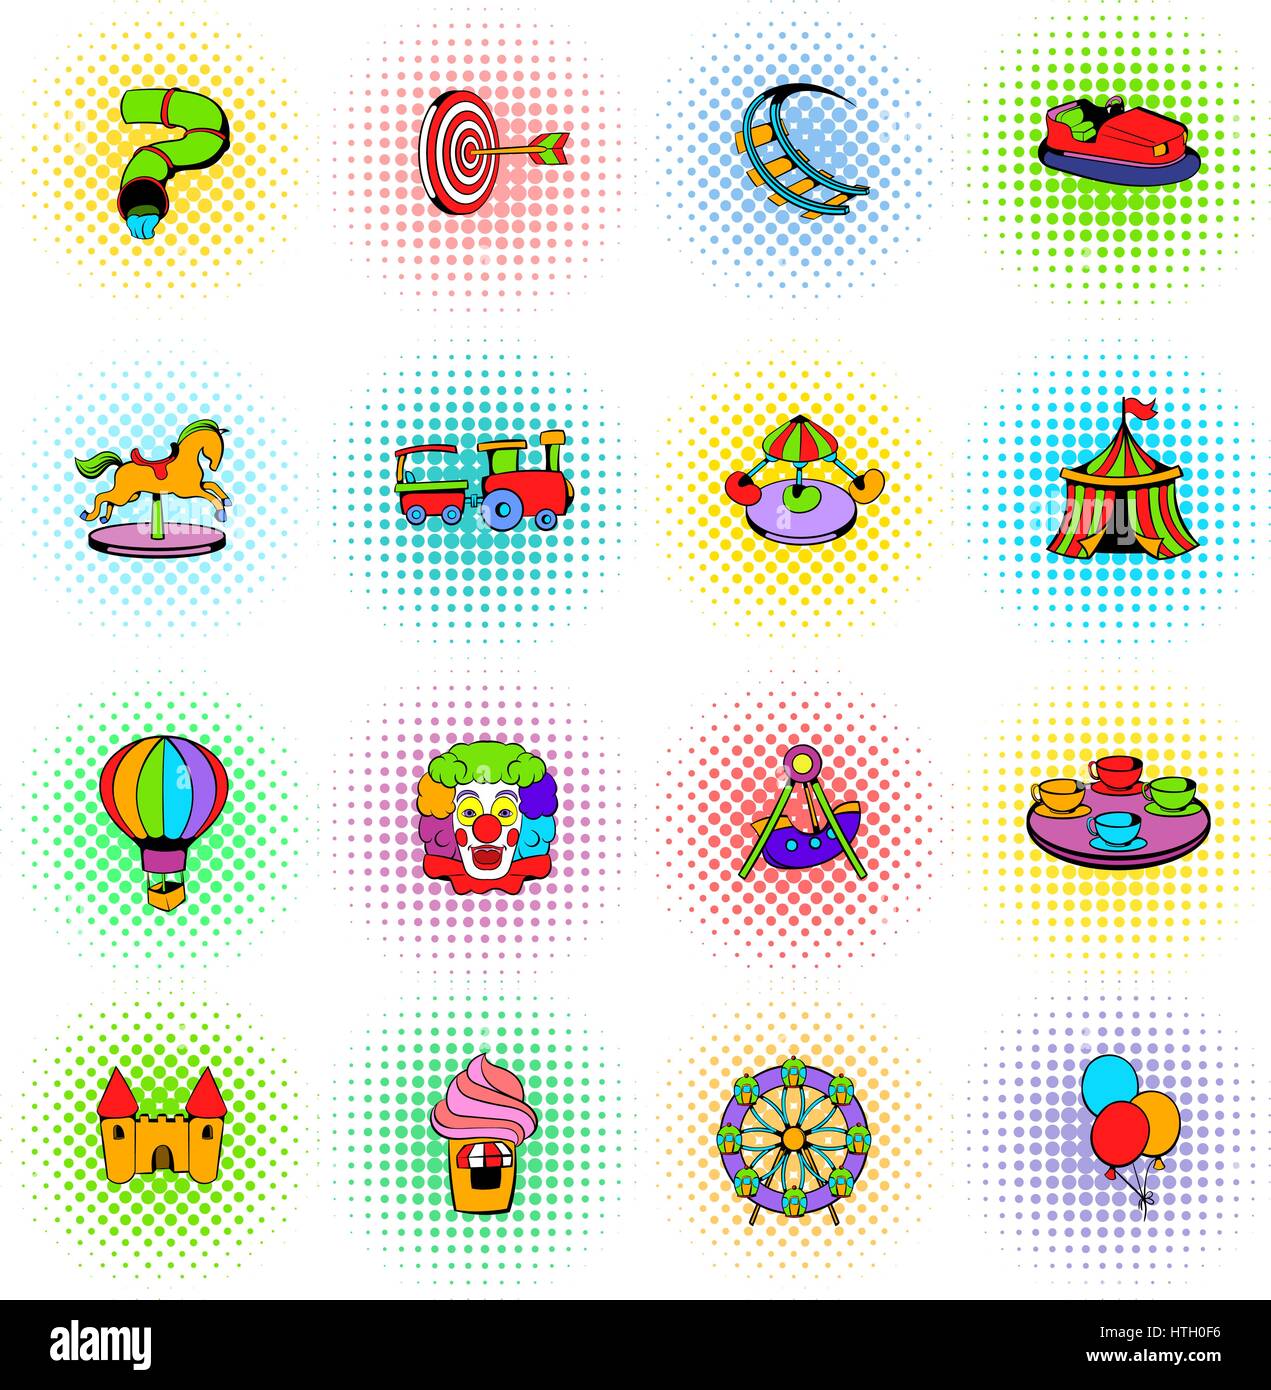 Amusement park set icons in comics style on a white background Stock Vector